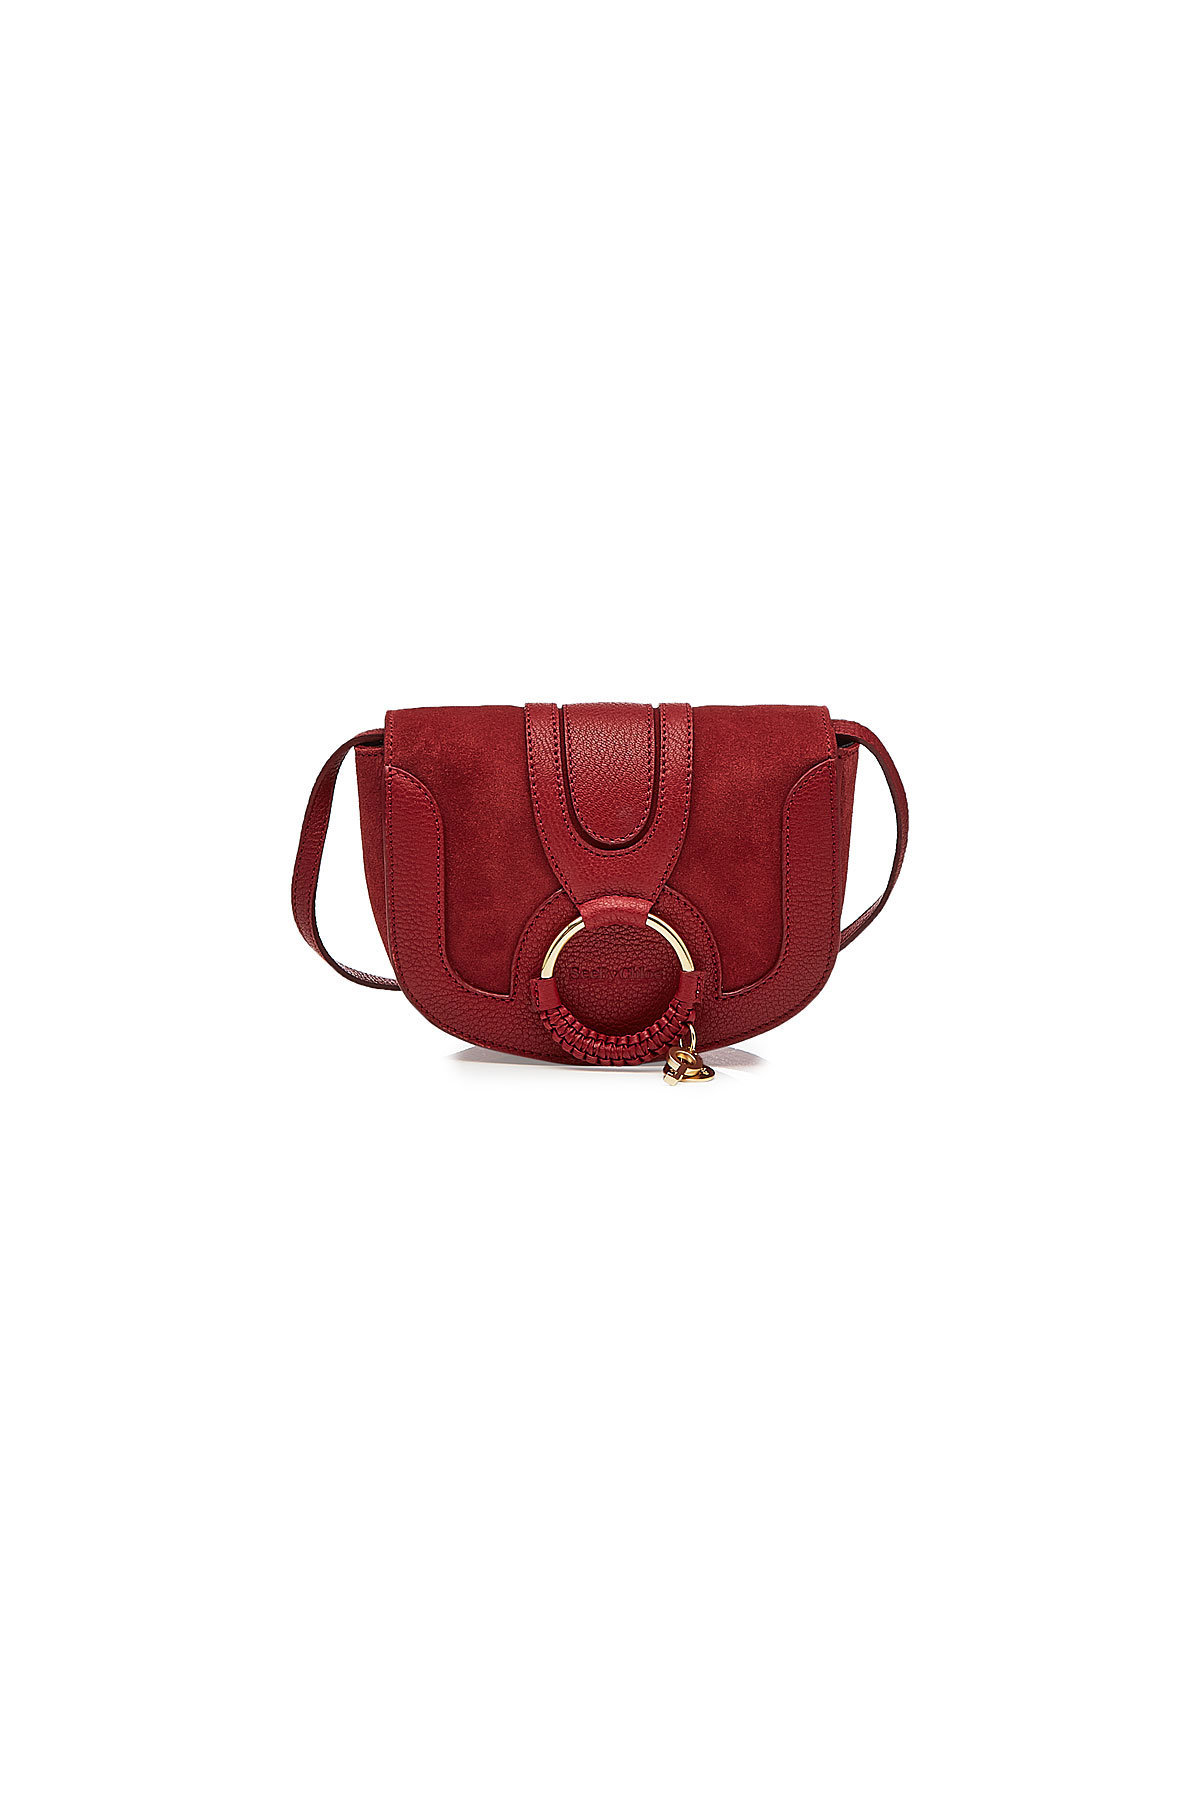 See by Chloe - Mini Shoulder Bag with Leather and Suede